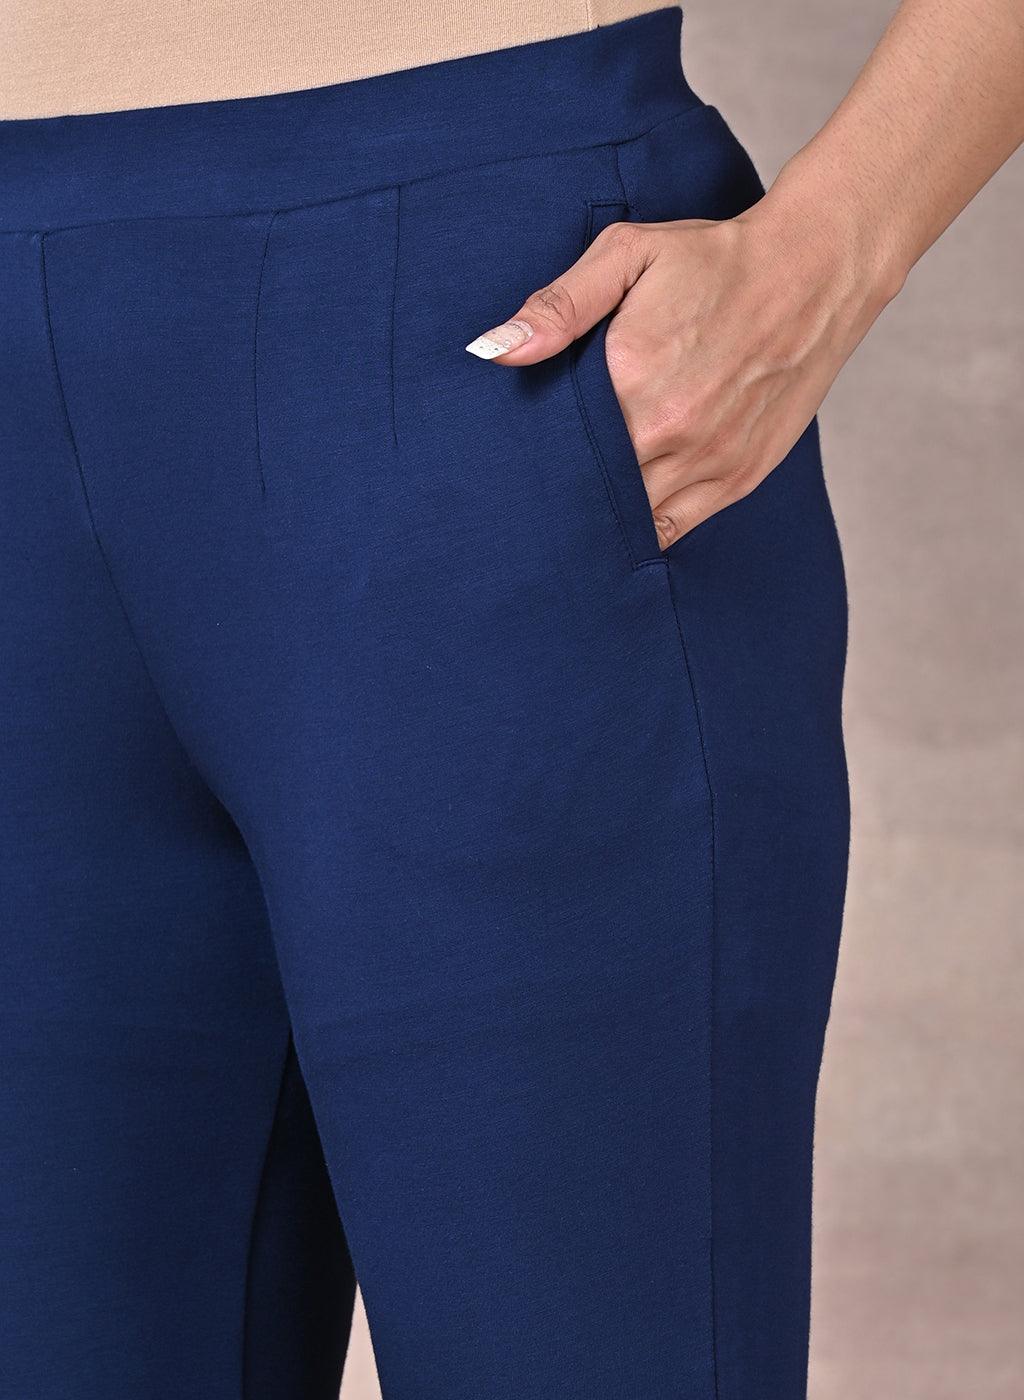 Navy Blue Fitted Trouser Pants With Straight Hem - Lakshita